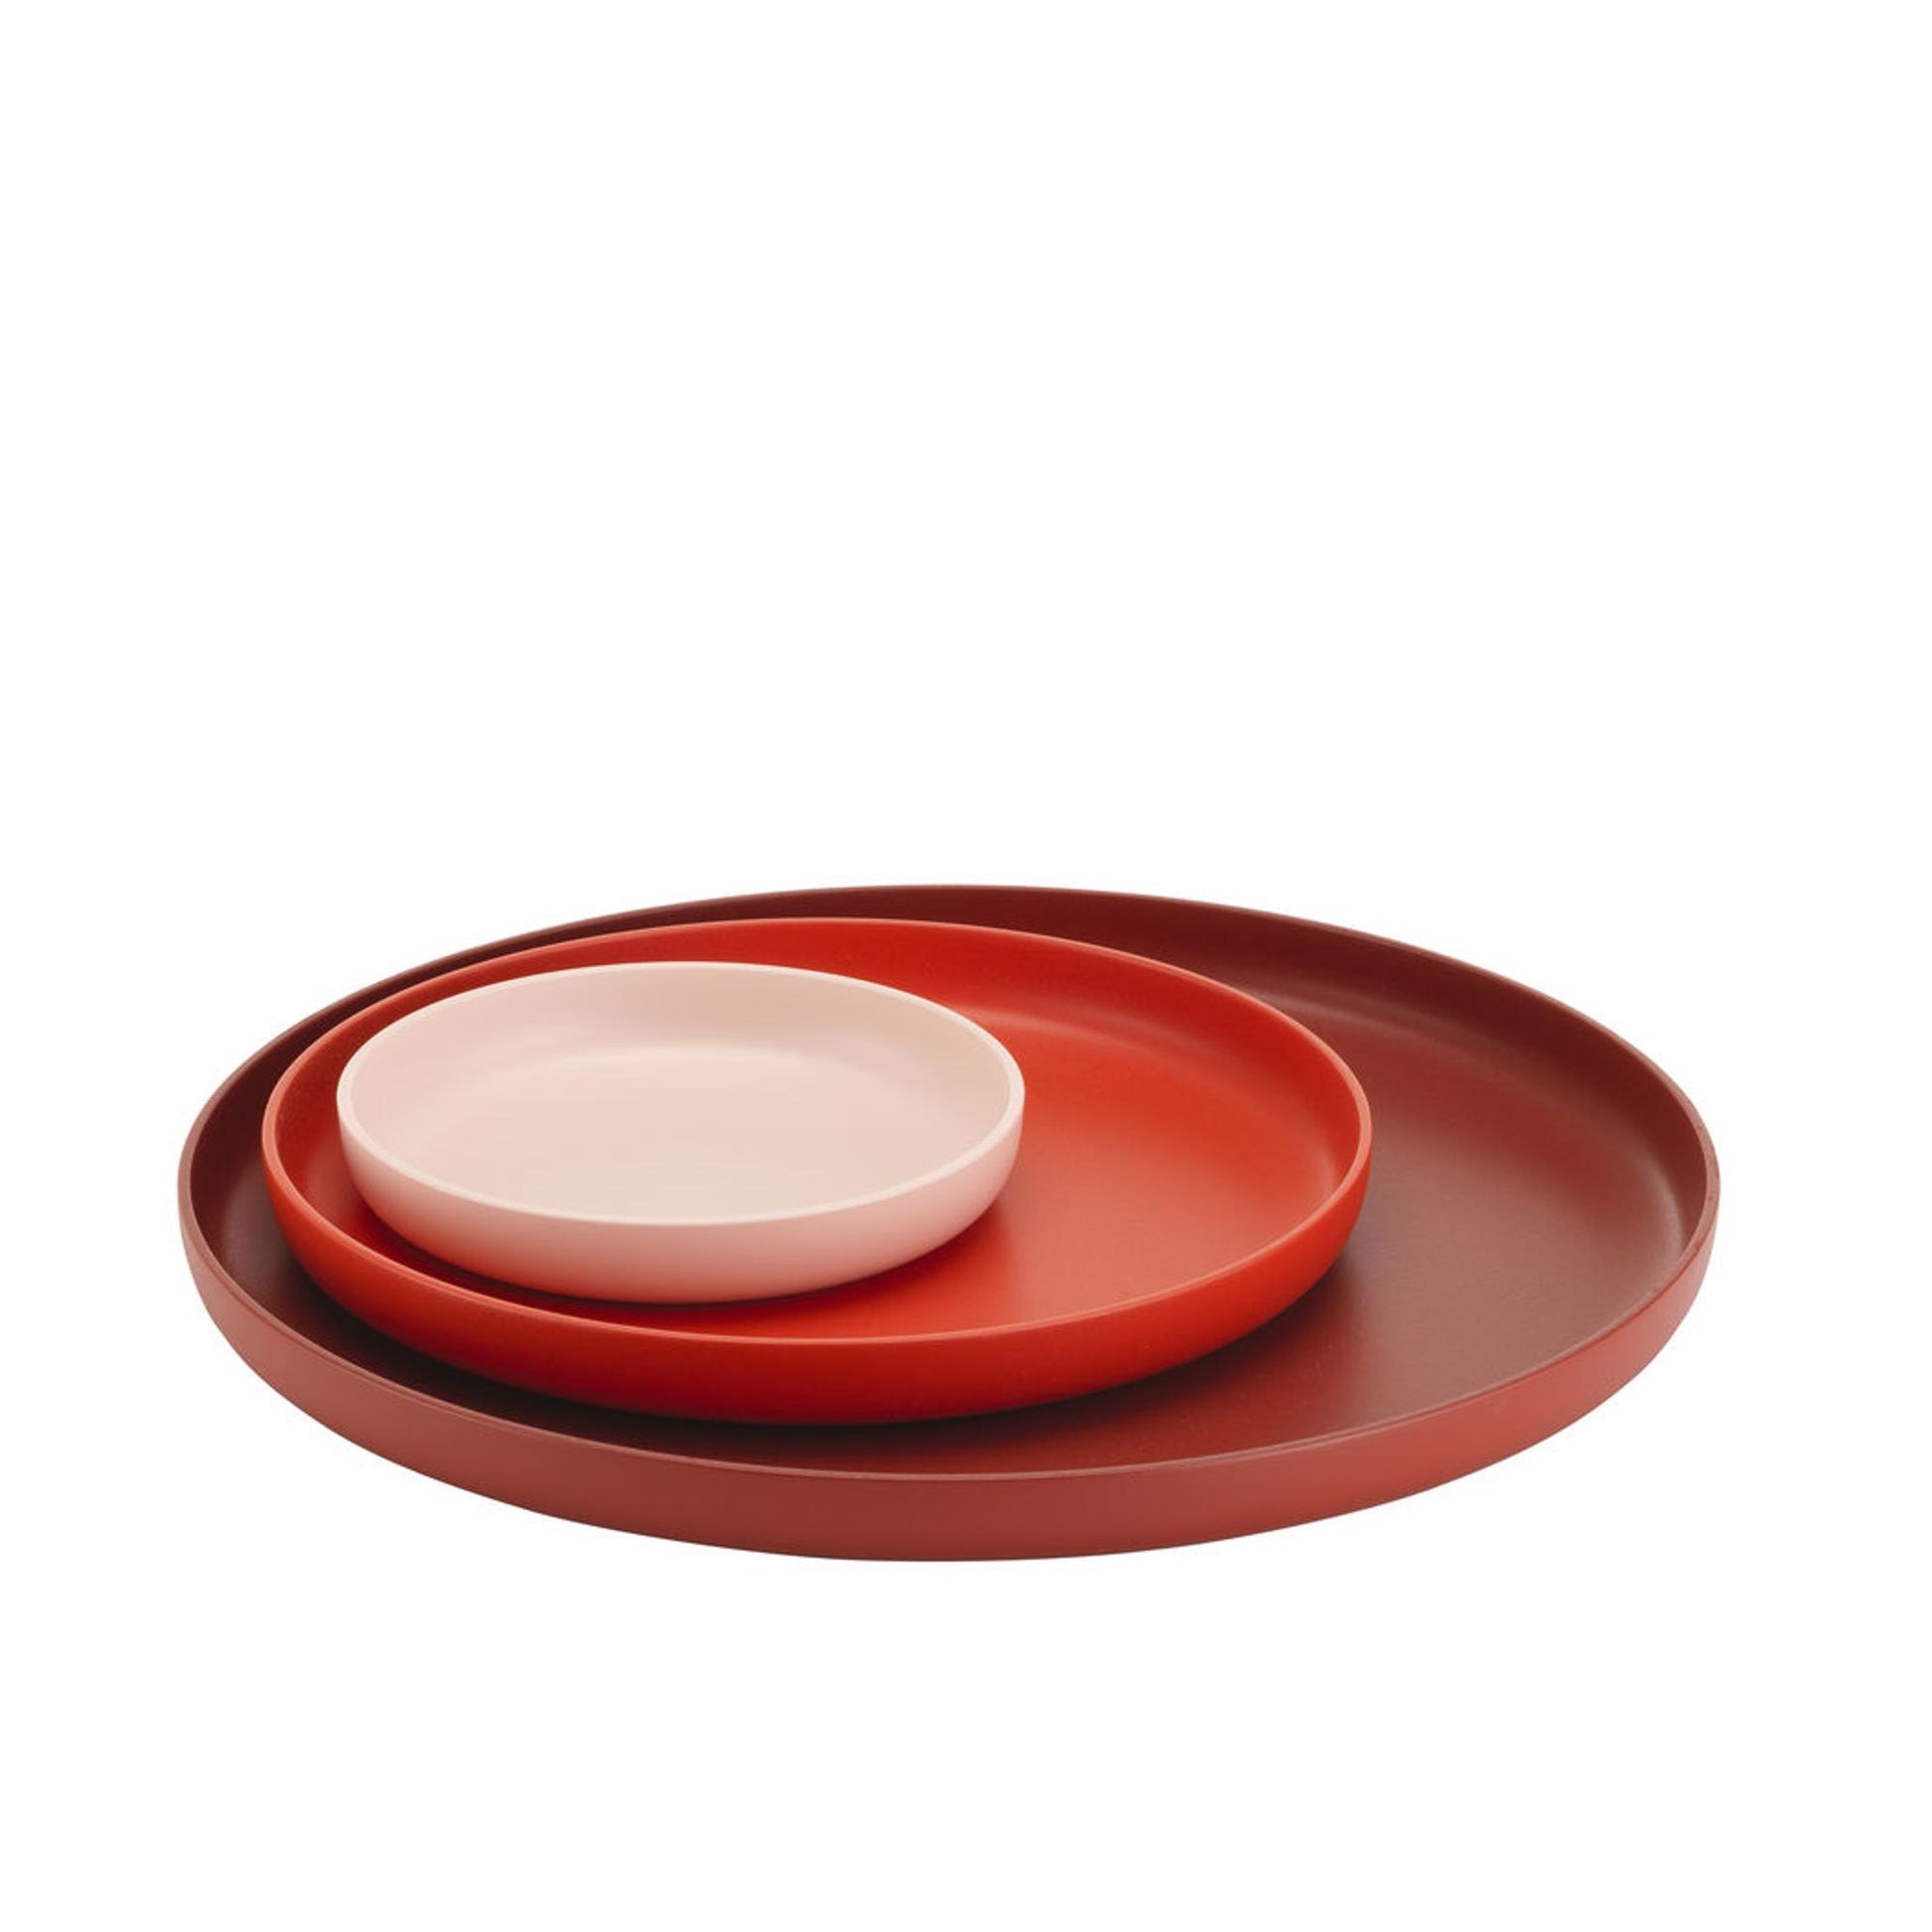 Trays Tray Set with 3 by Vitra #Red